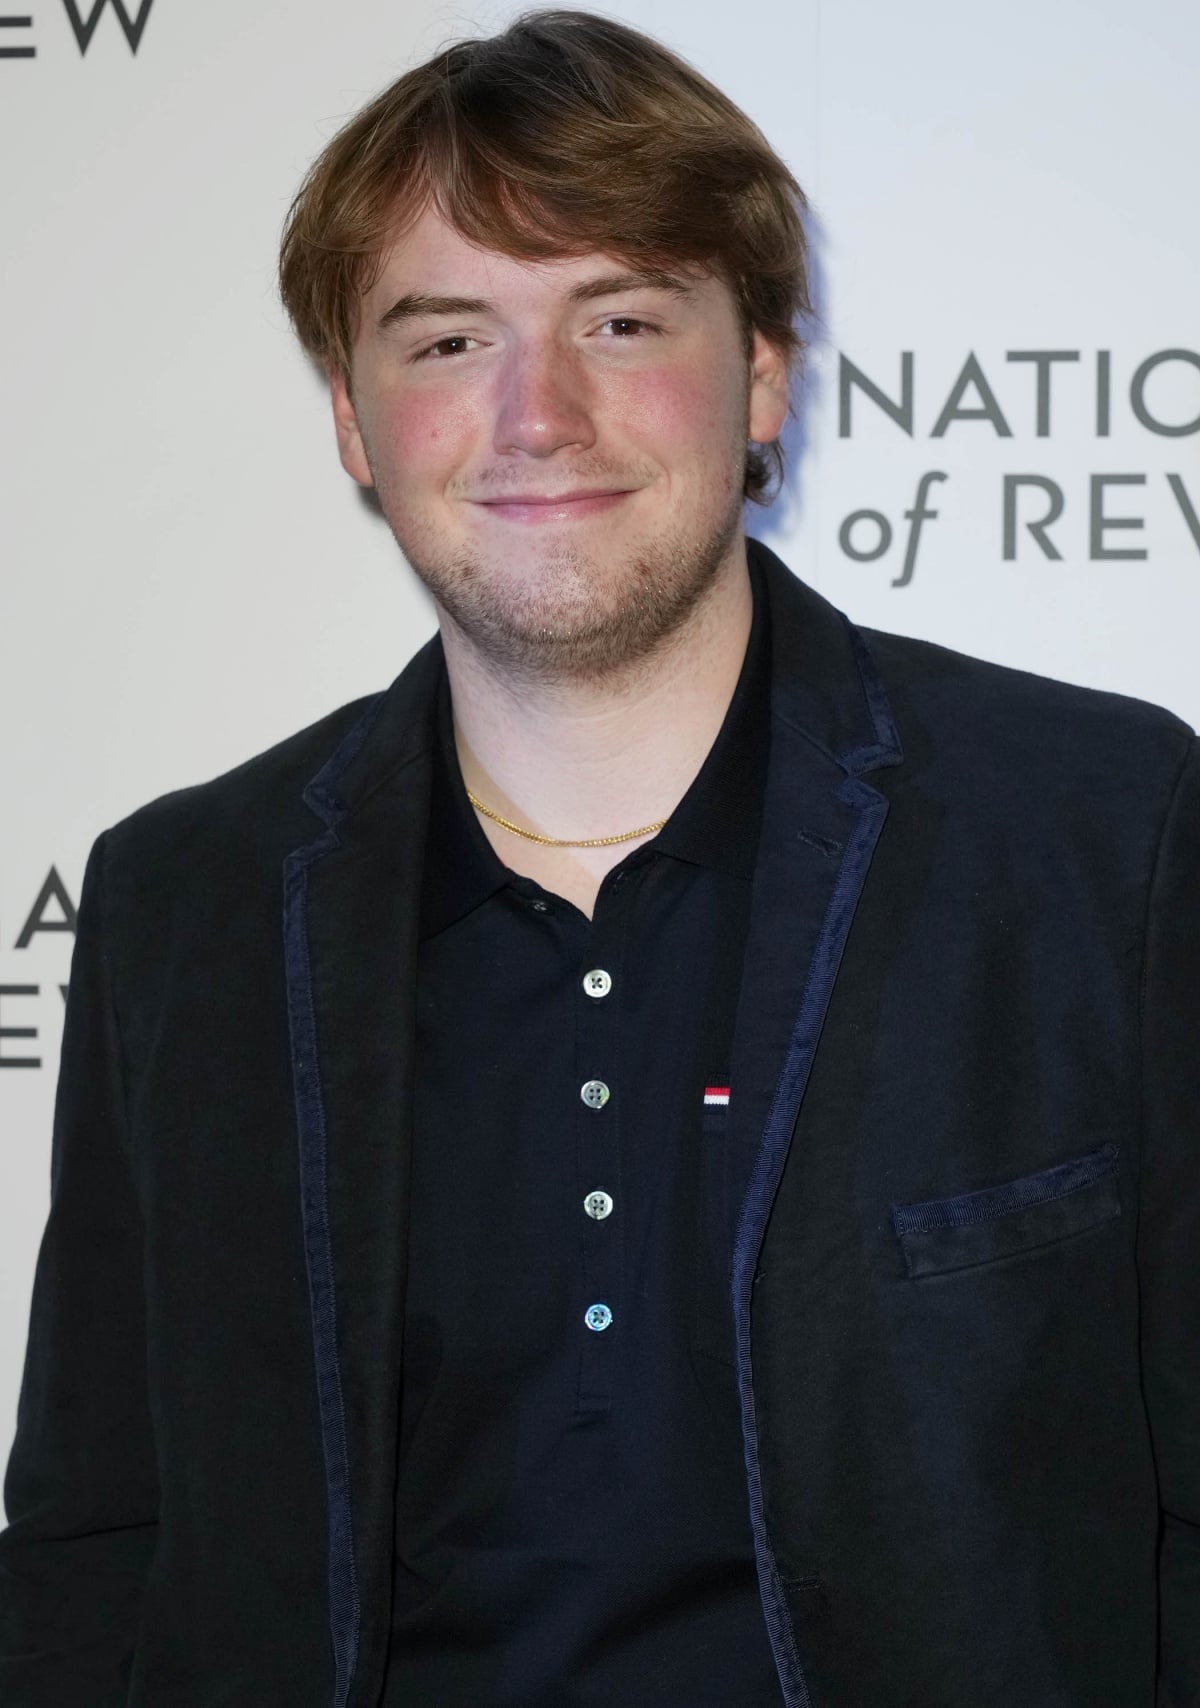 Cooper Hoffman, the son of the late actor Philip Seymour Hoffman and costume designer Mimi O'Donnell, made his film debut in Licorice Pizza (2021) directed by Paul Thomas Anderson, receiving critical acclaim and a Golden Globe nomination for his performance